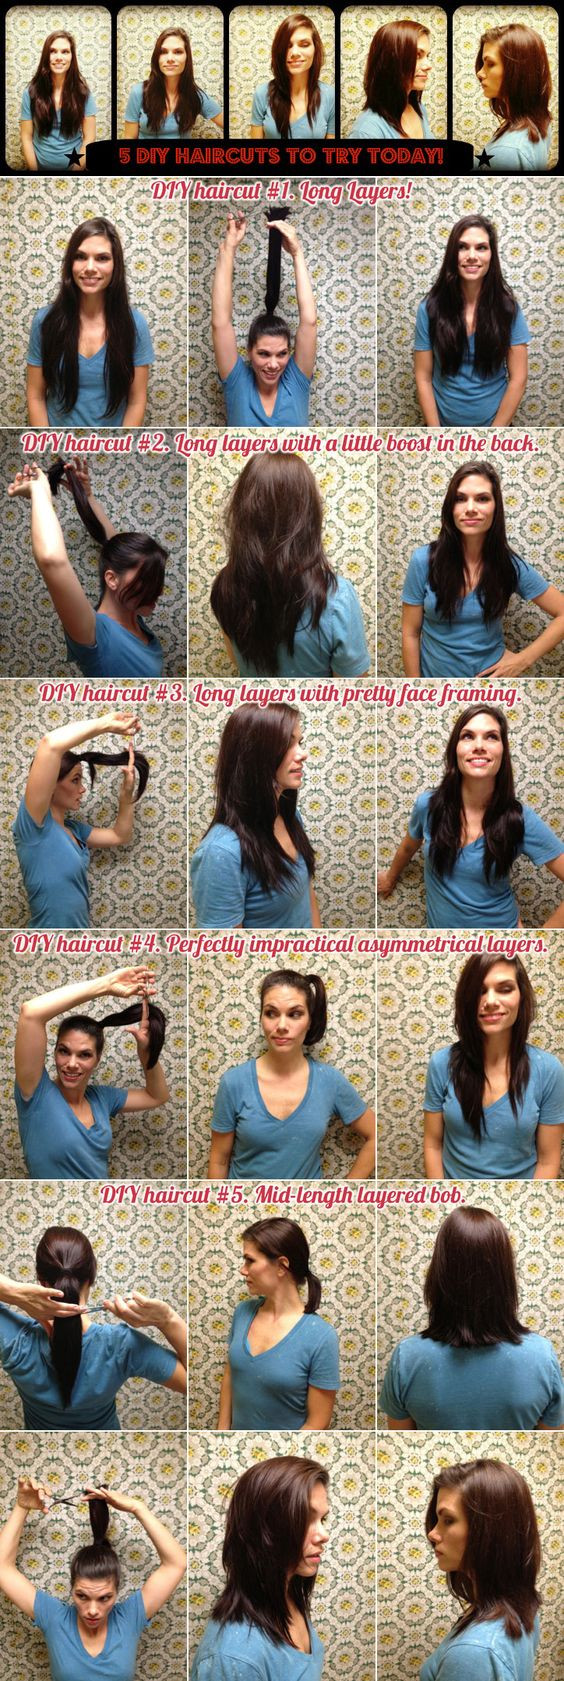 DIY Hair Trim
 5 DIY HAIRCUTS to try today CLICK for instructions from